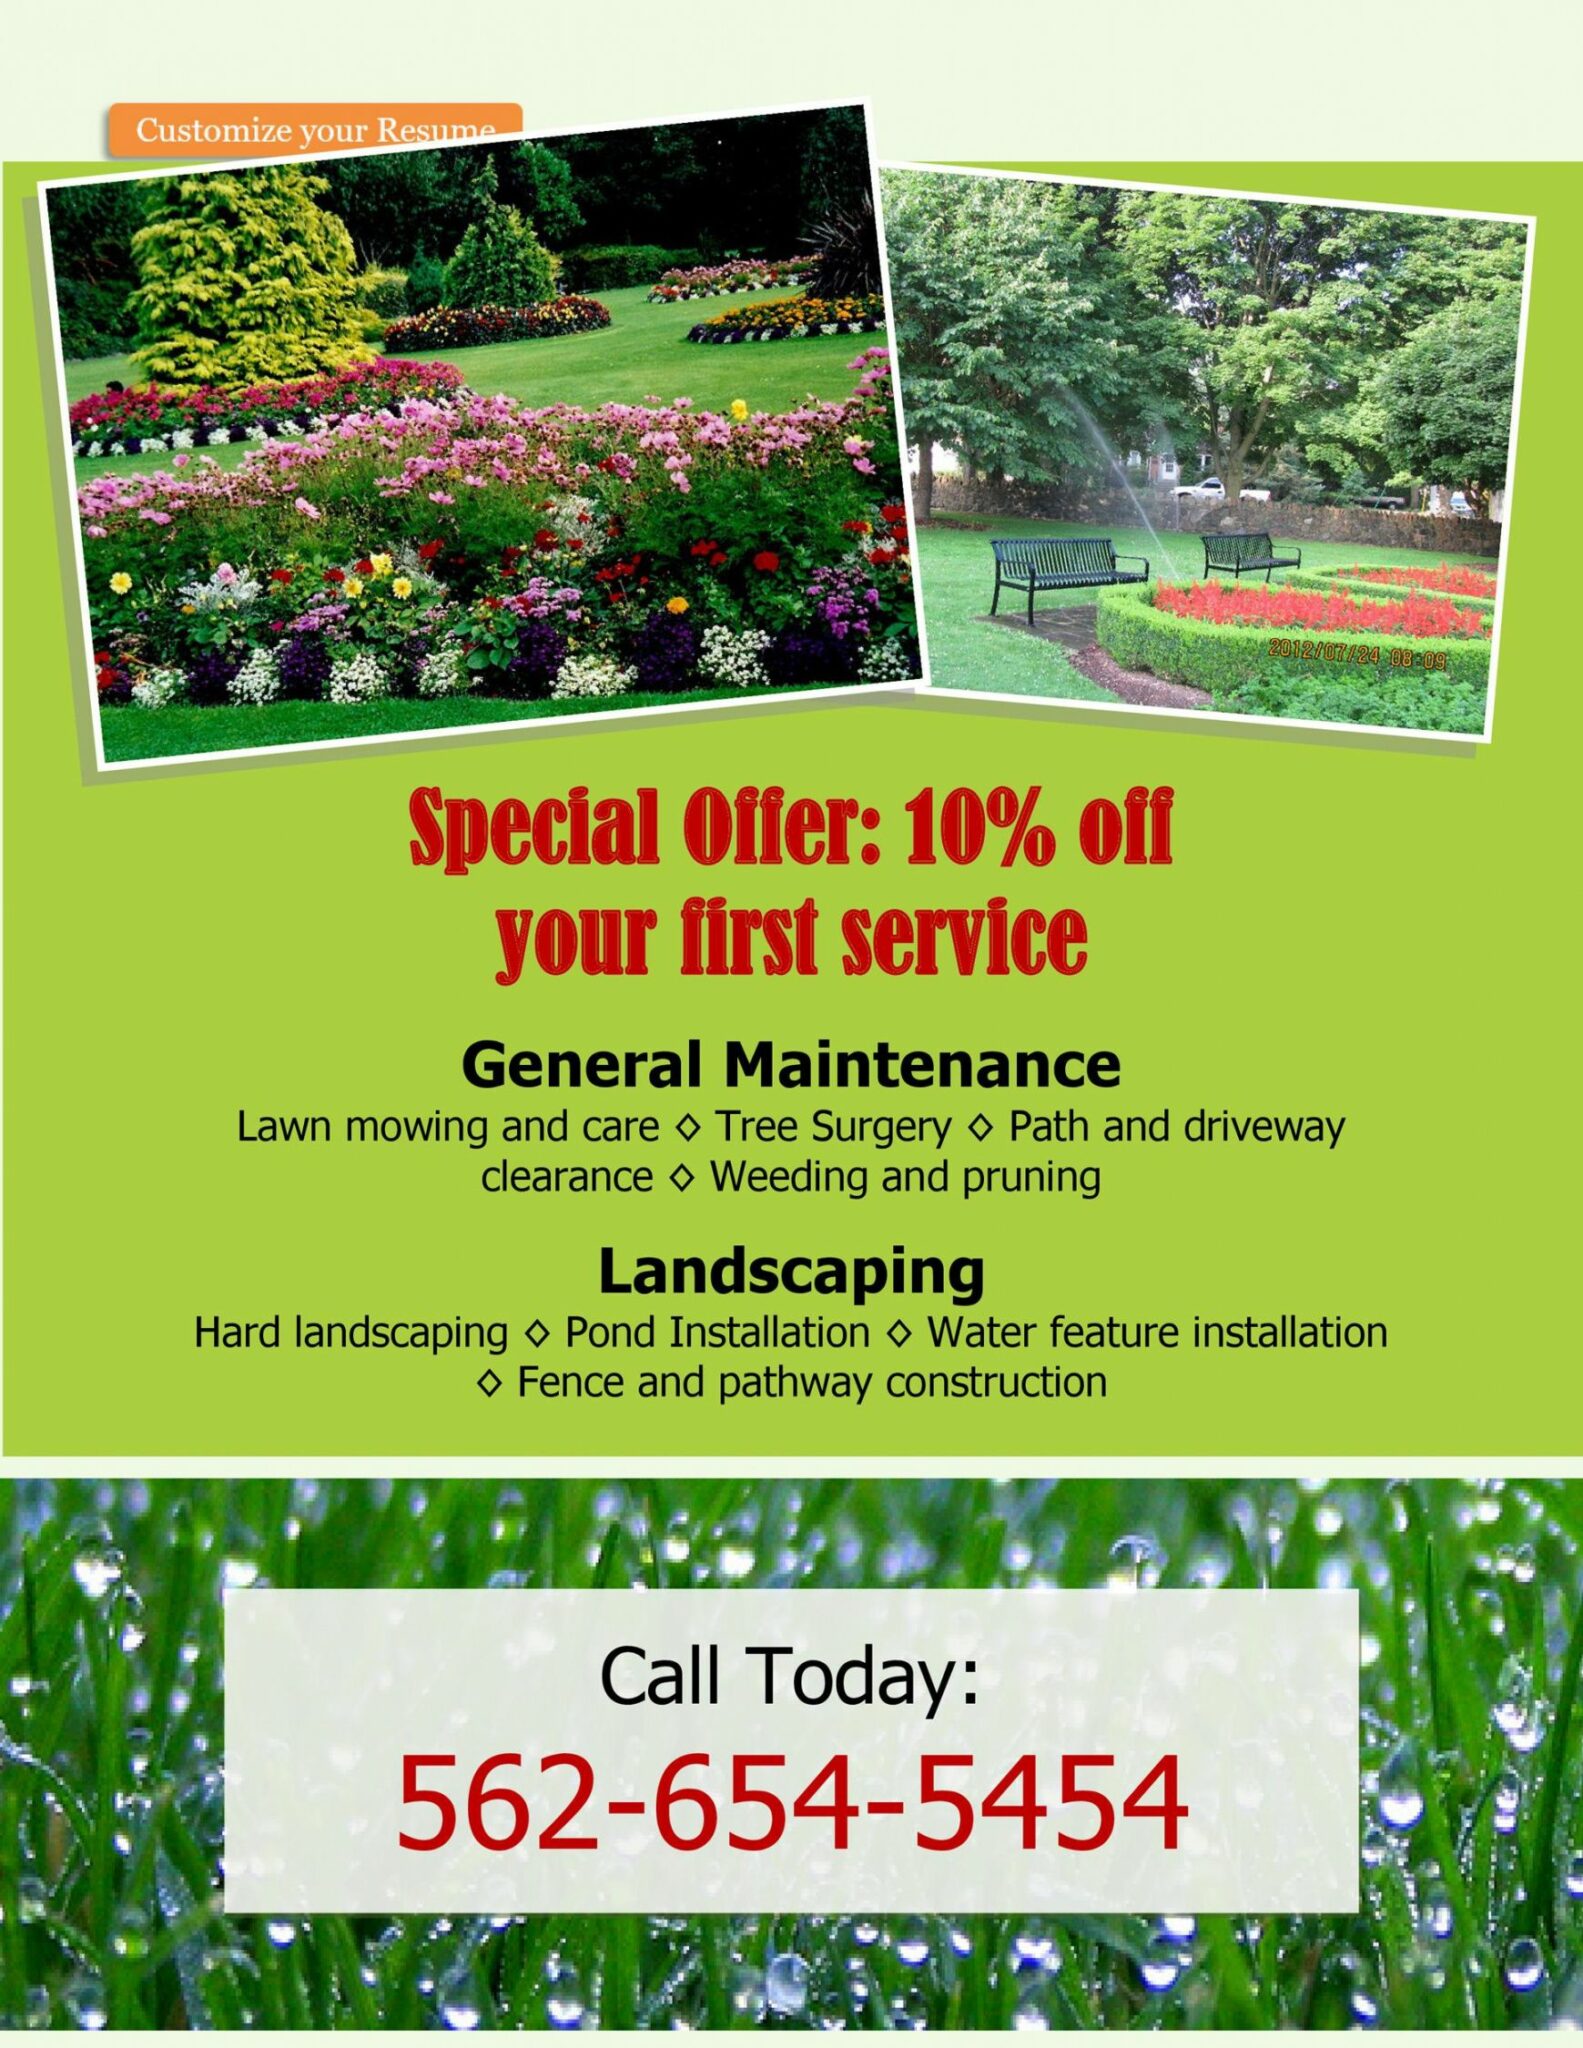 Sample 30 Free Lawn Care Flyer Templates Lawn Mower Flyers ᐅ Lawn